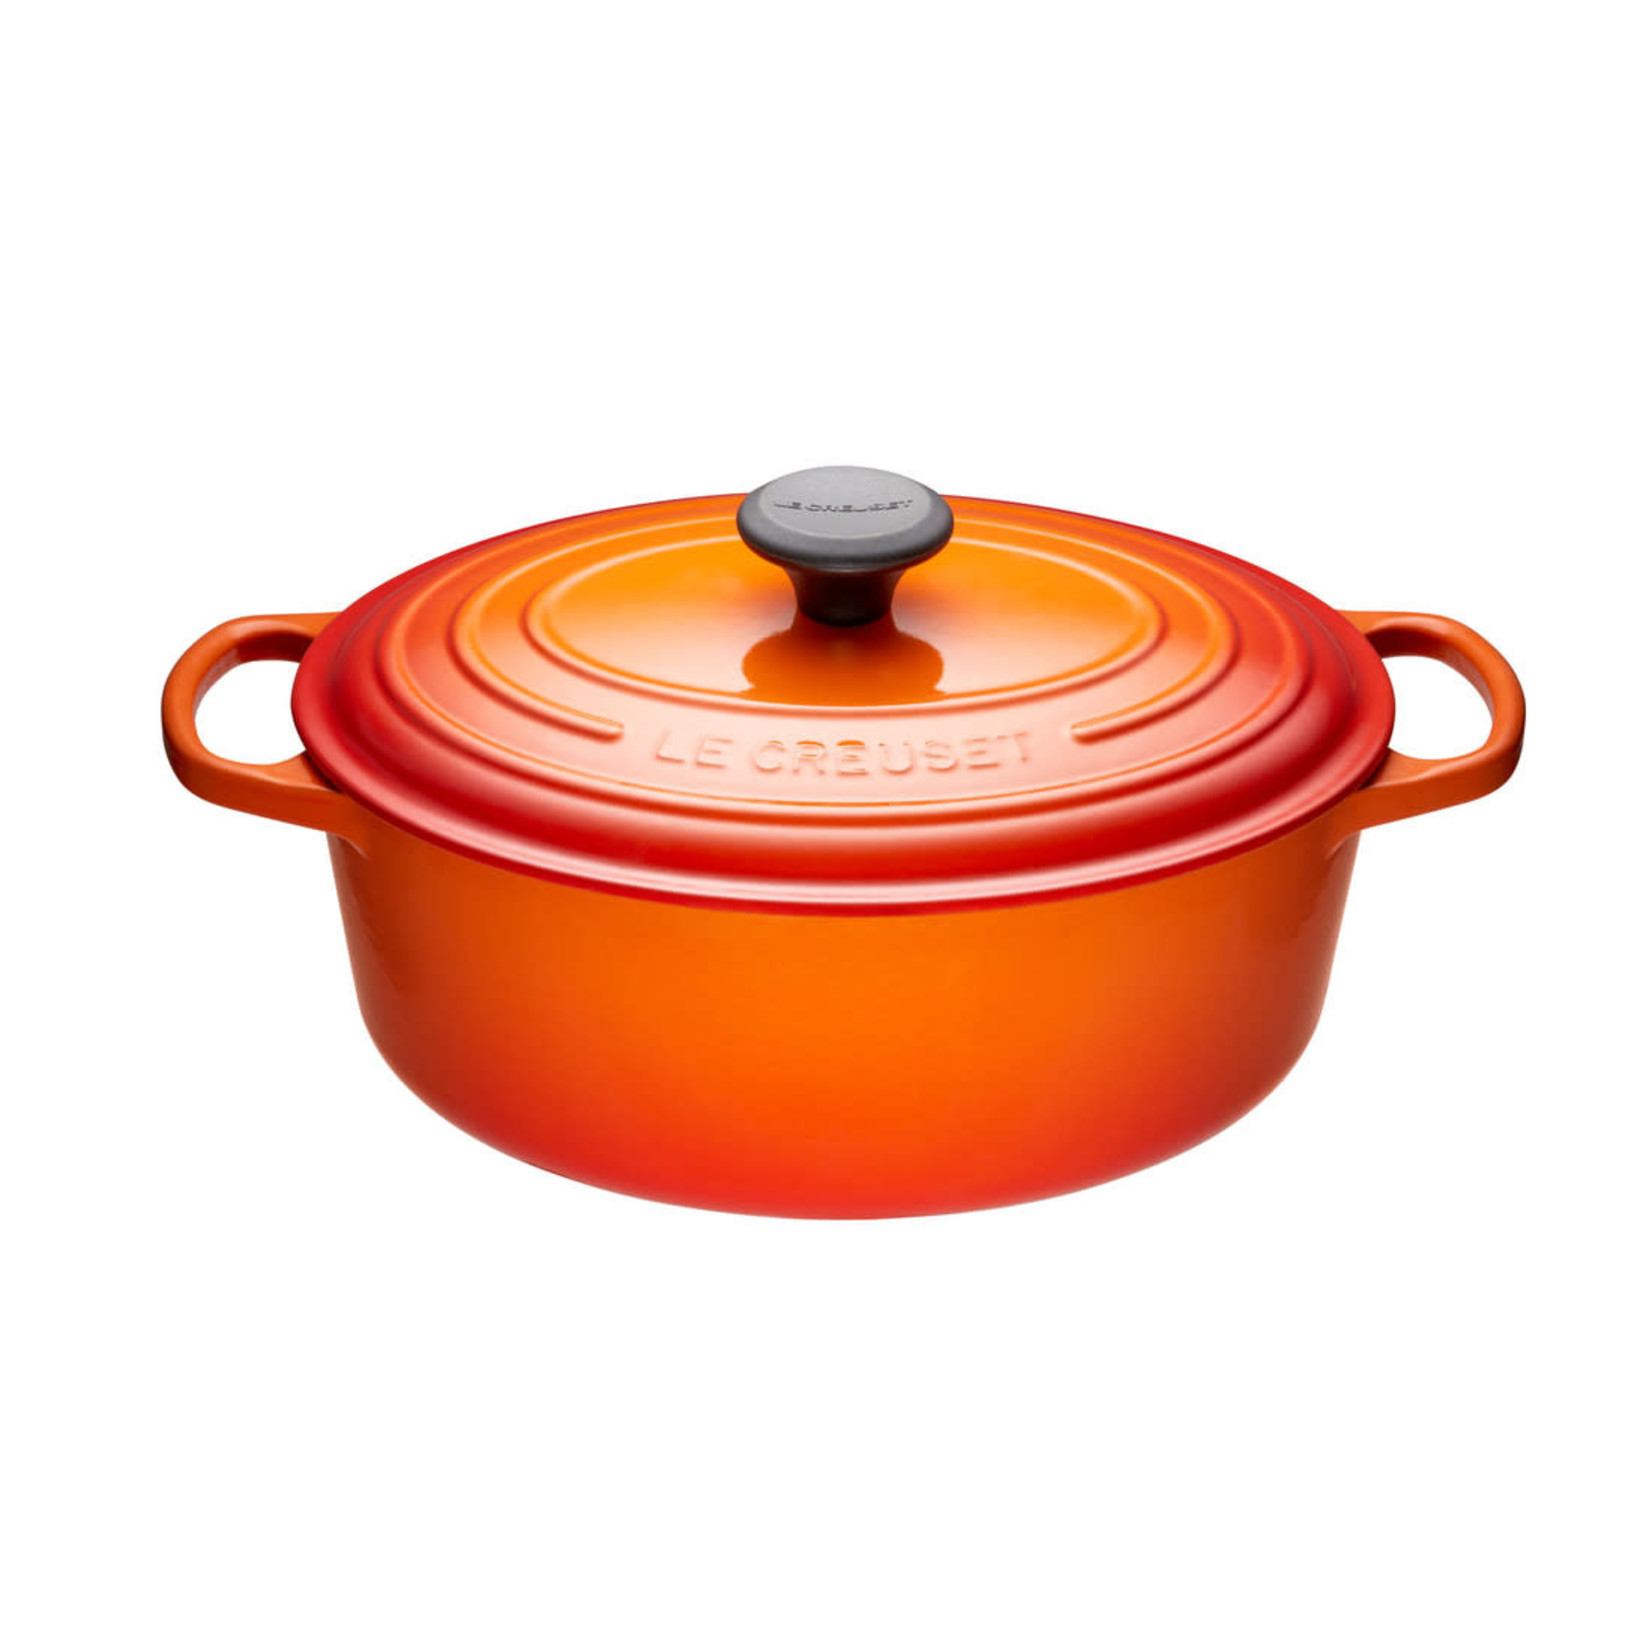 LE CREUSET LE CREUSET Oval French Oven 6.3L